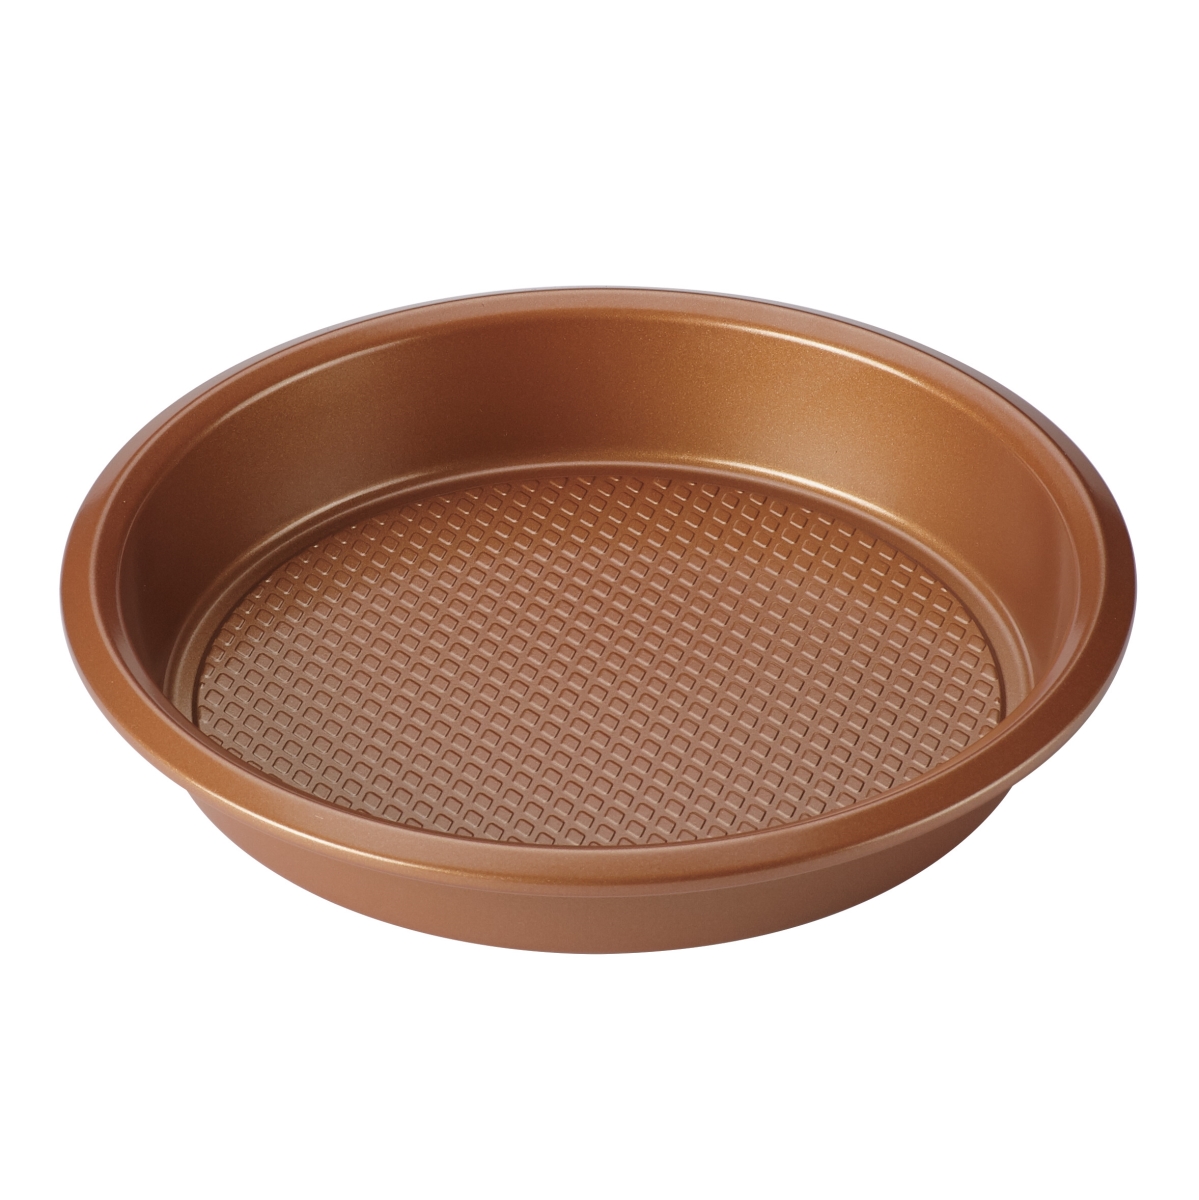 47003 Round Cake Pan, 9 In. - Copper